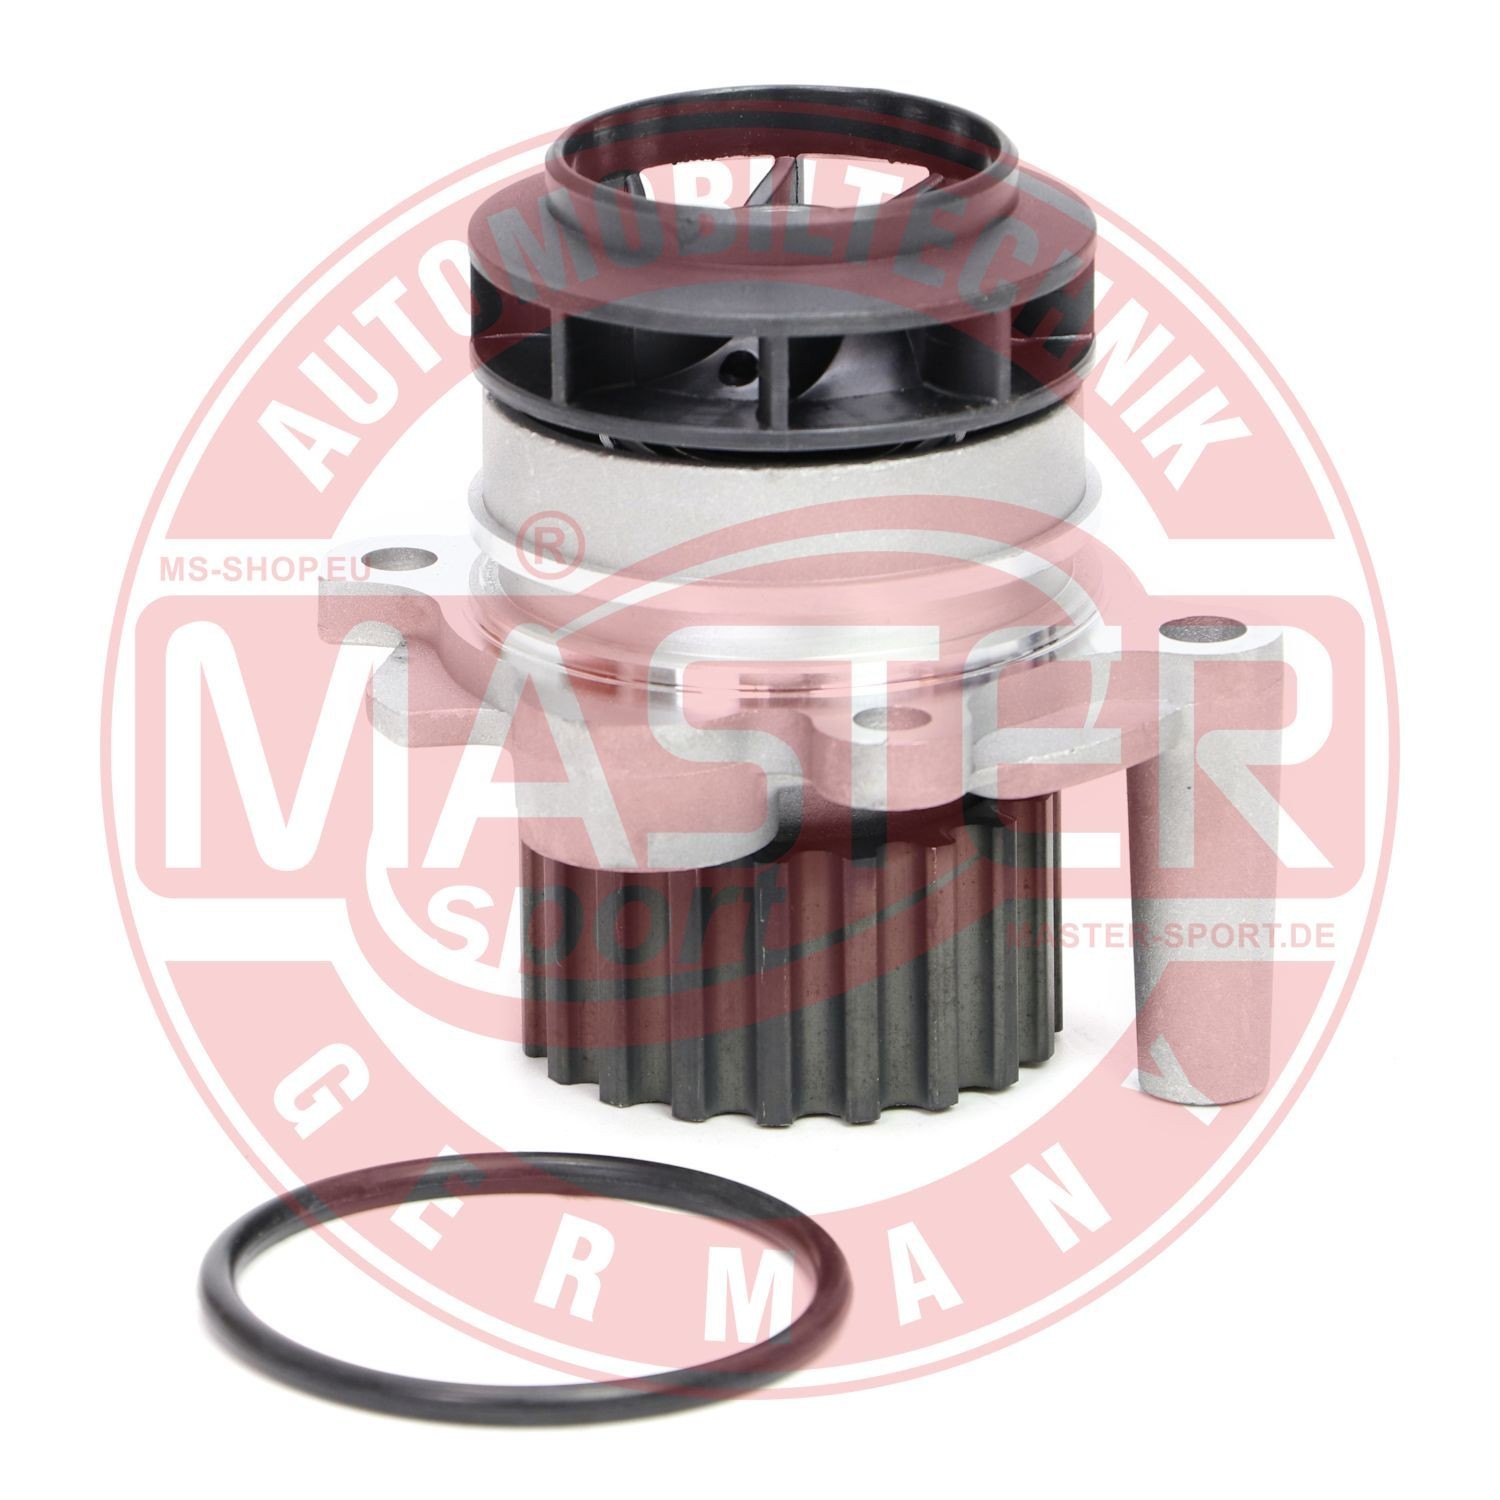 MASTER-SPORT 655-WP-PCS-MS Water pump Number of Teeth: 19, with seal, without accessories, Mechanical, Metal, Water Pump Pulley Ø: 56 mm